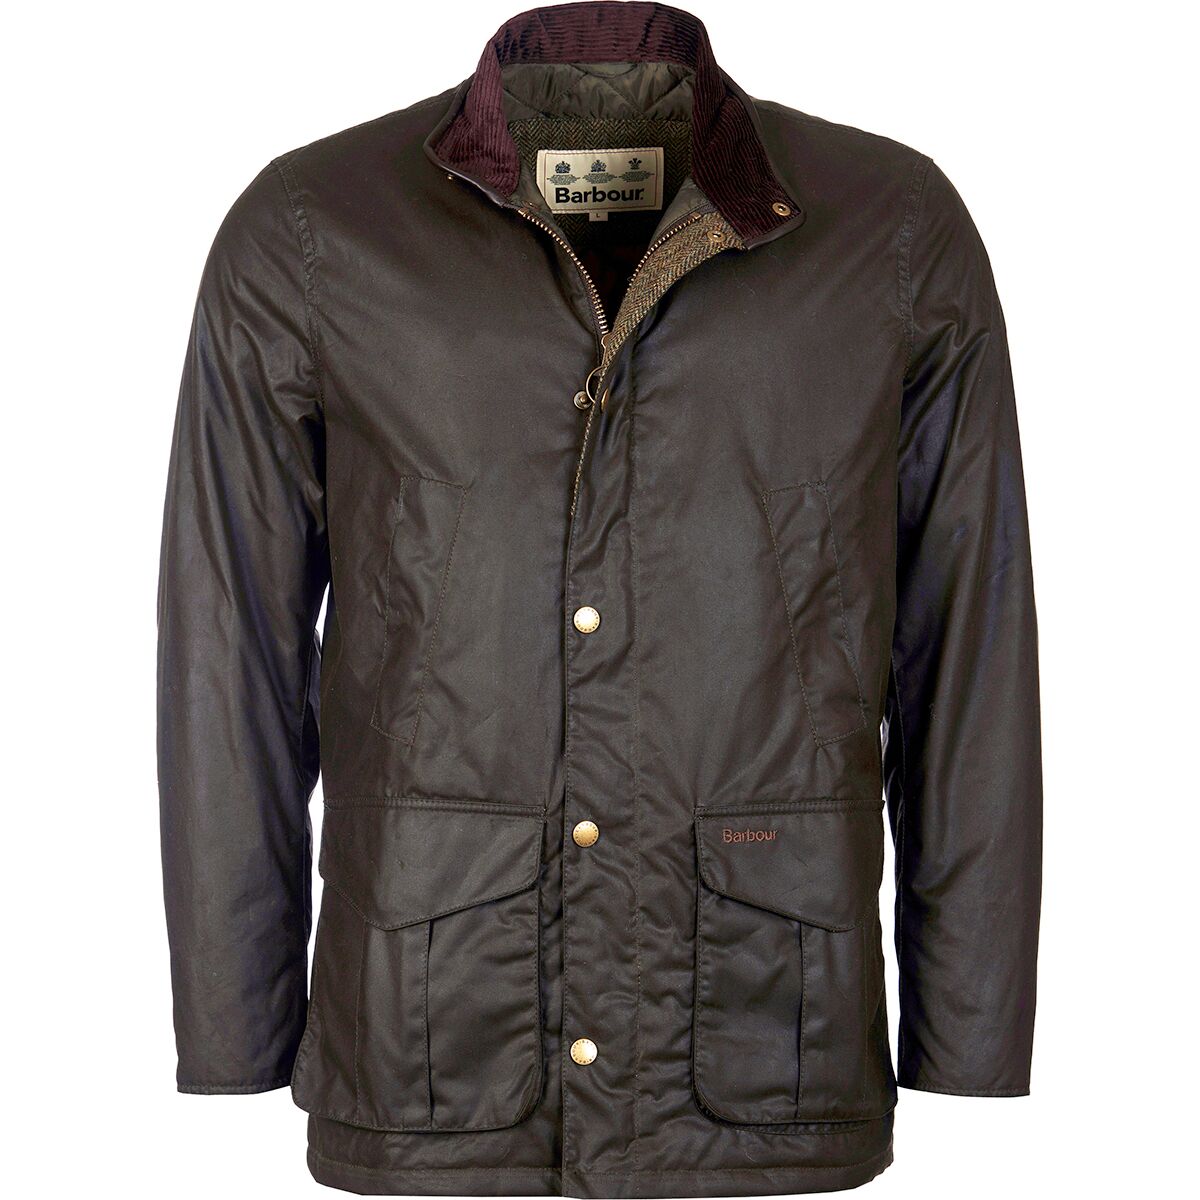 Barbour Hereford Wax Jacket - Men's - Clothing